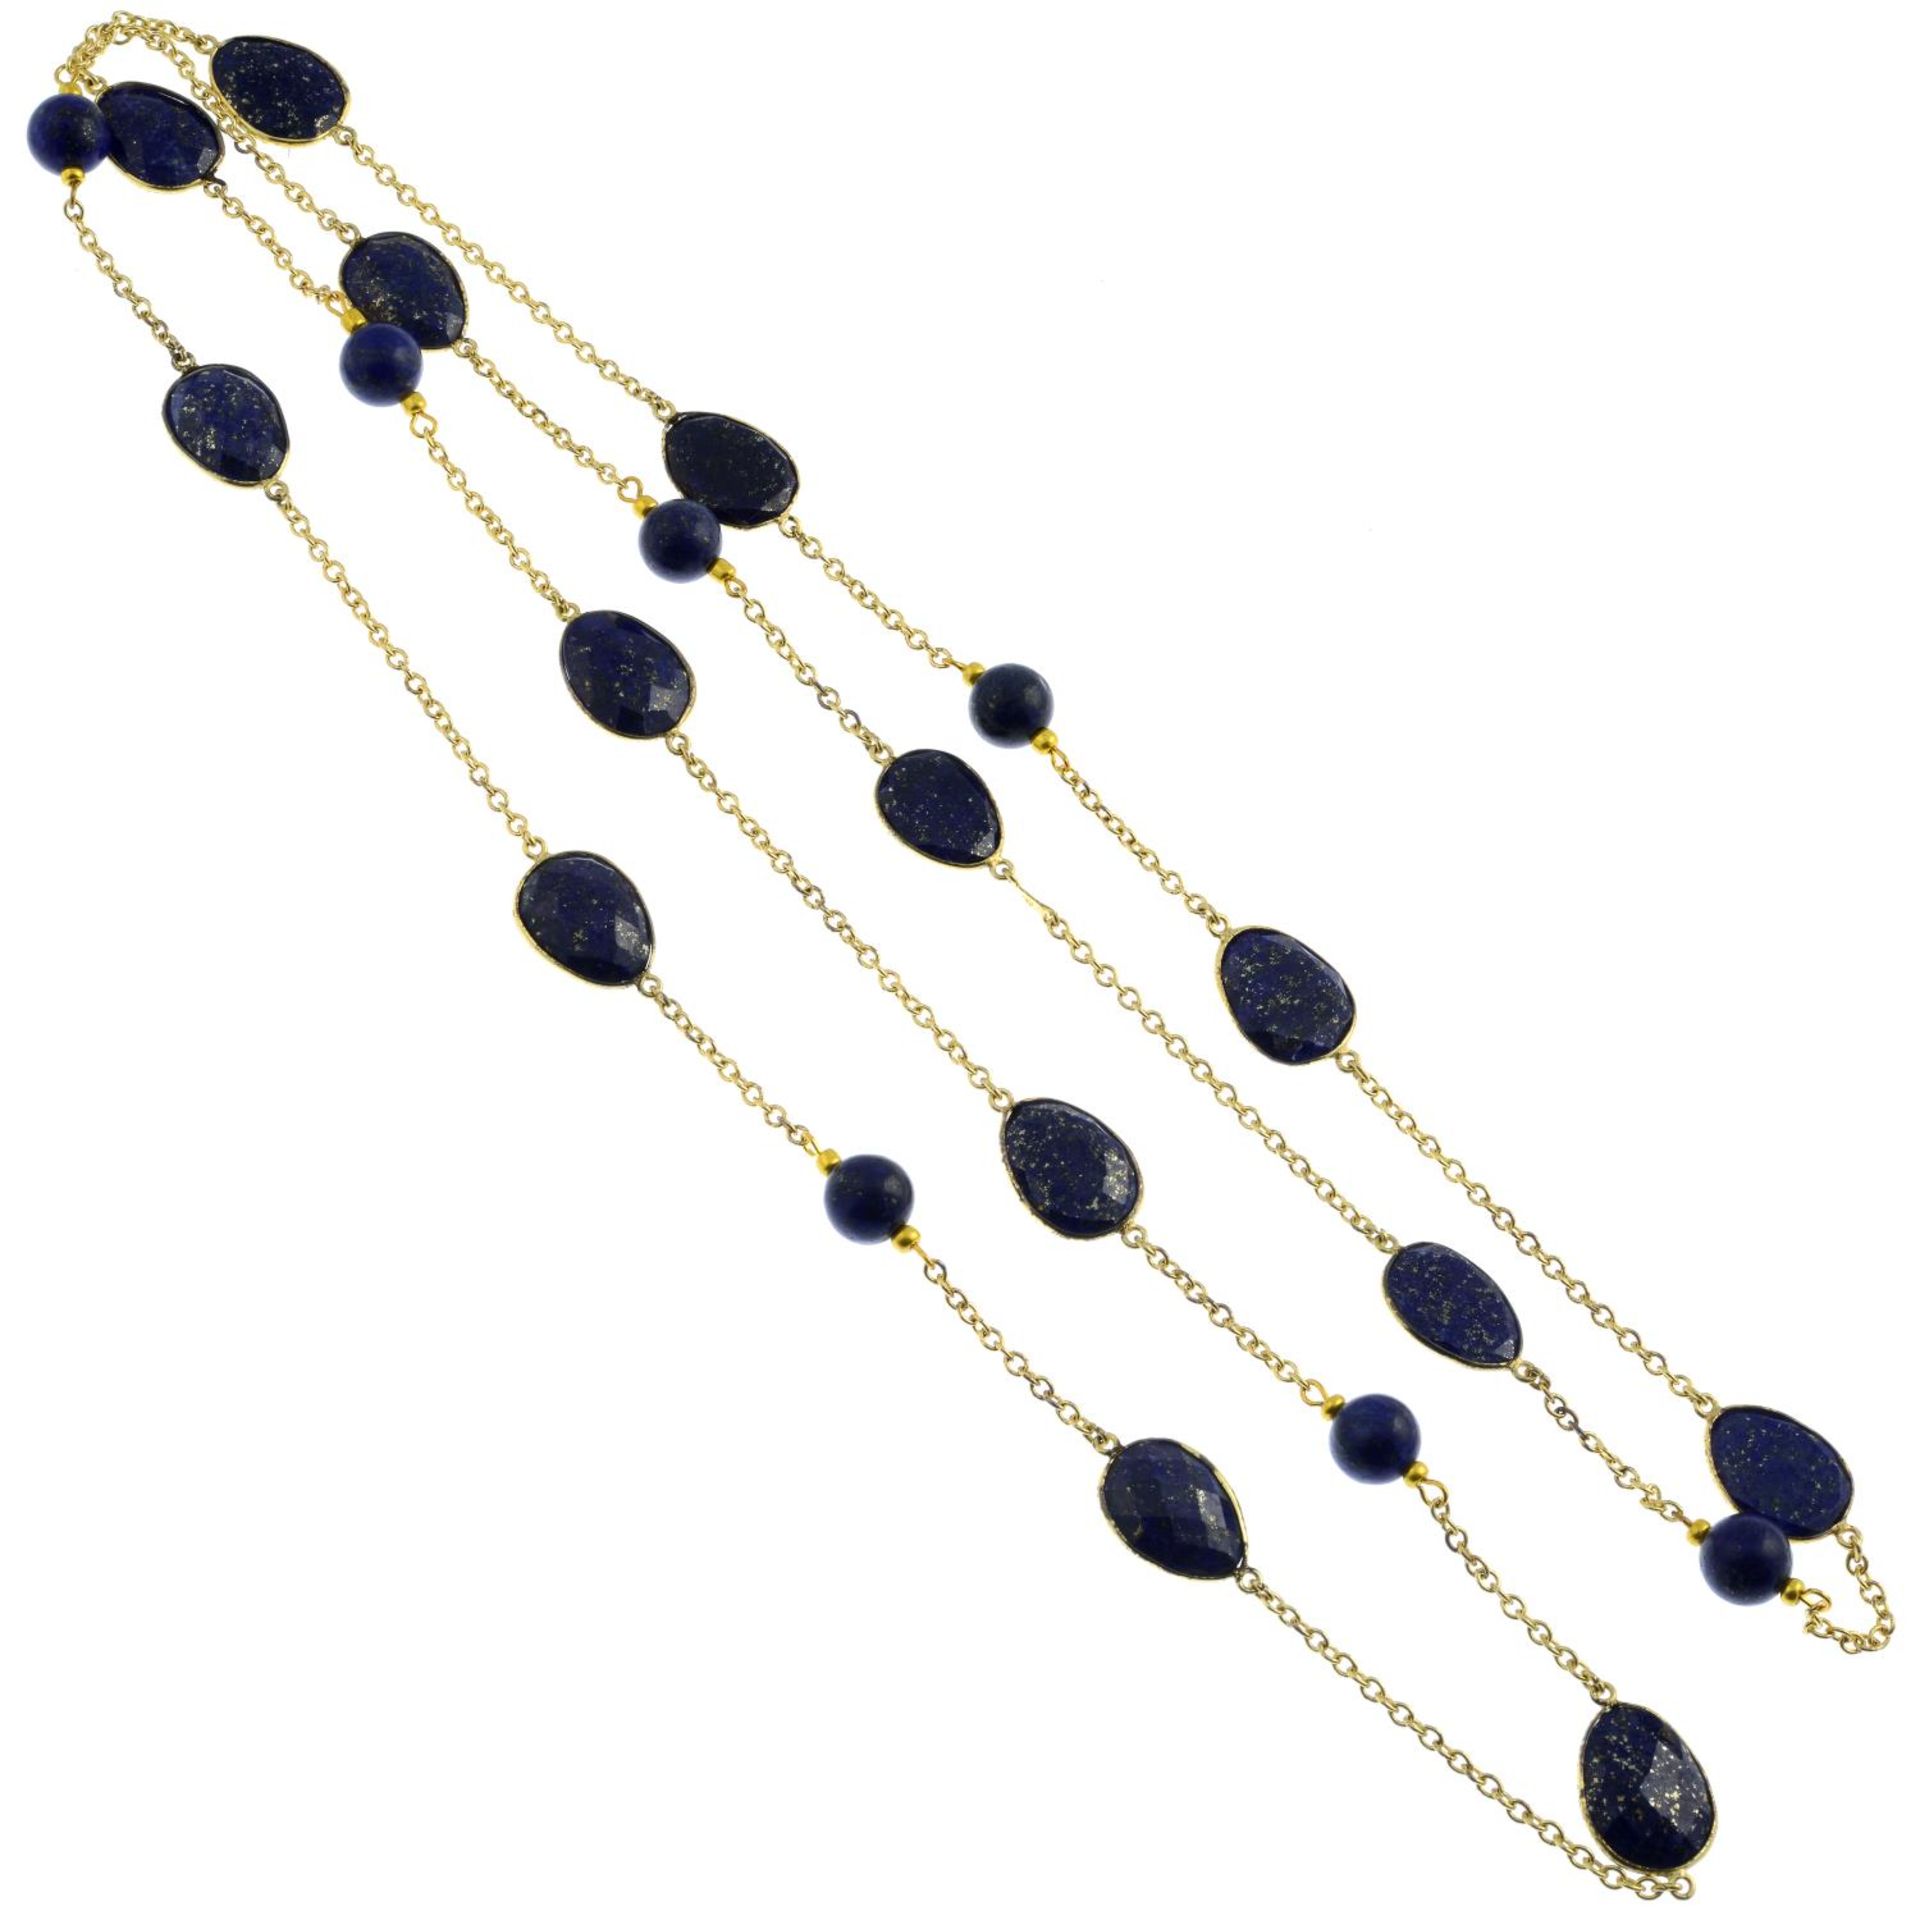 A lapis lazuli necklace and earrings.Earrings stamped 925.Length of necklace 124cms. - Bild 2 aus 2